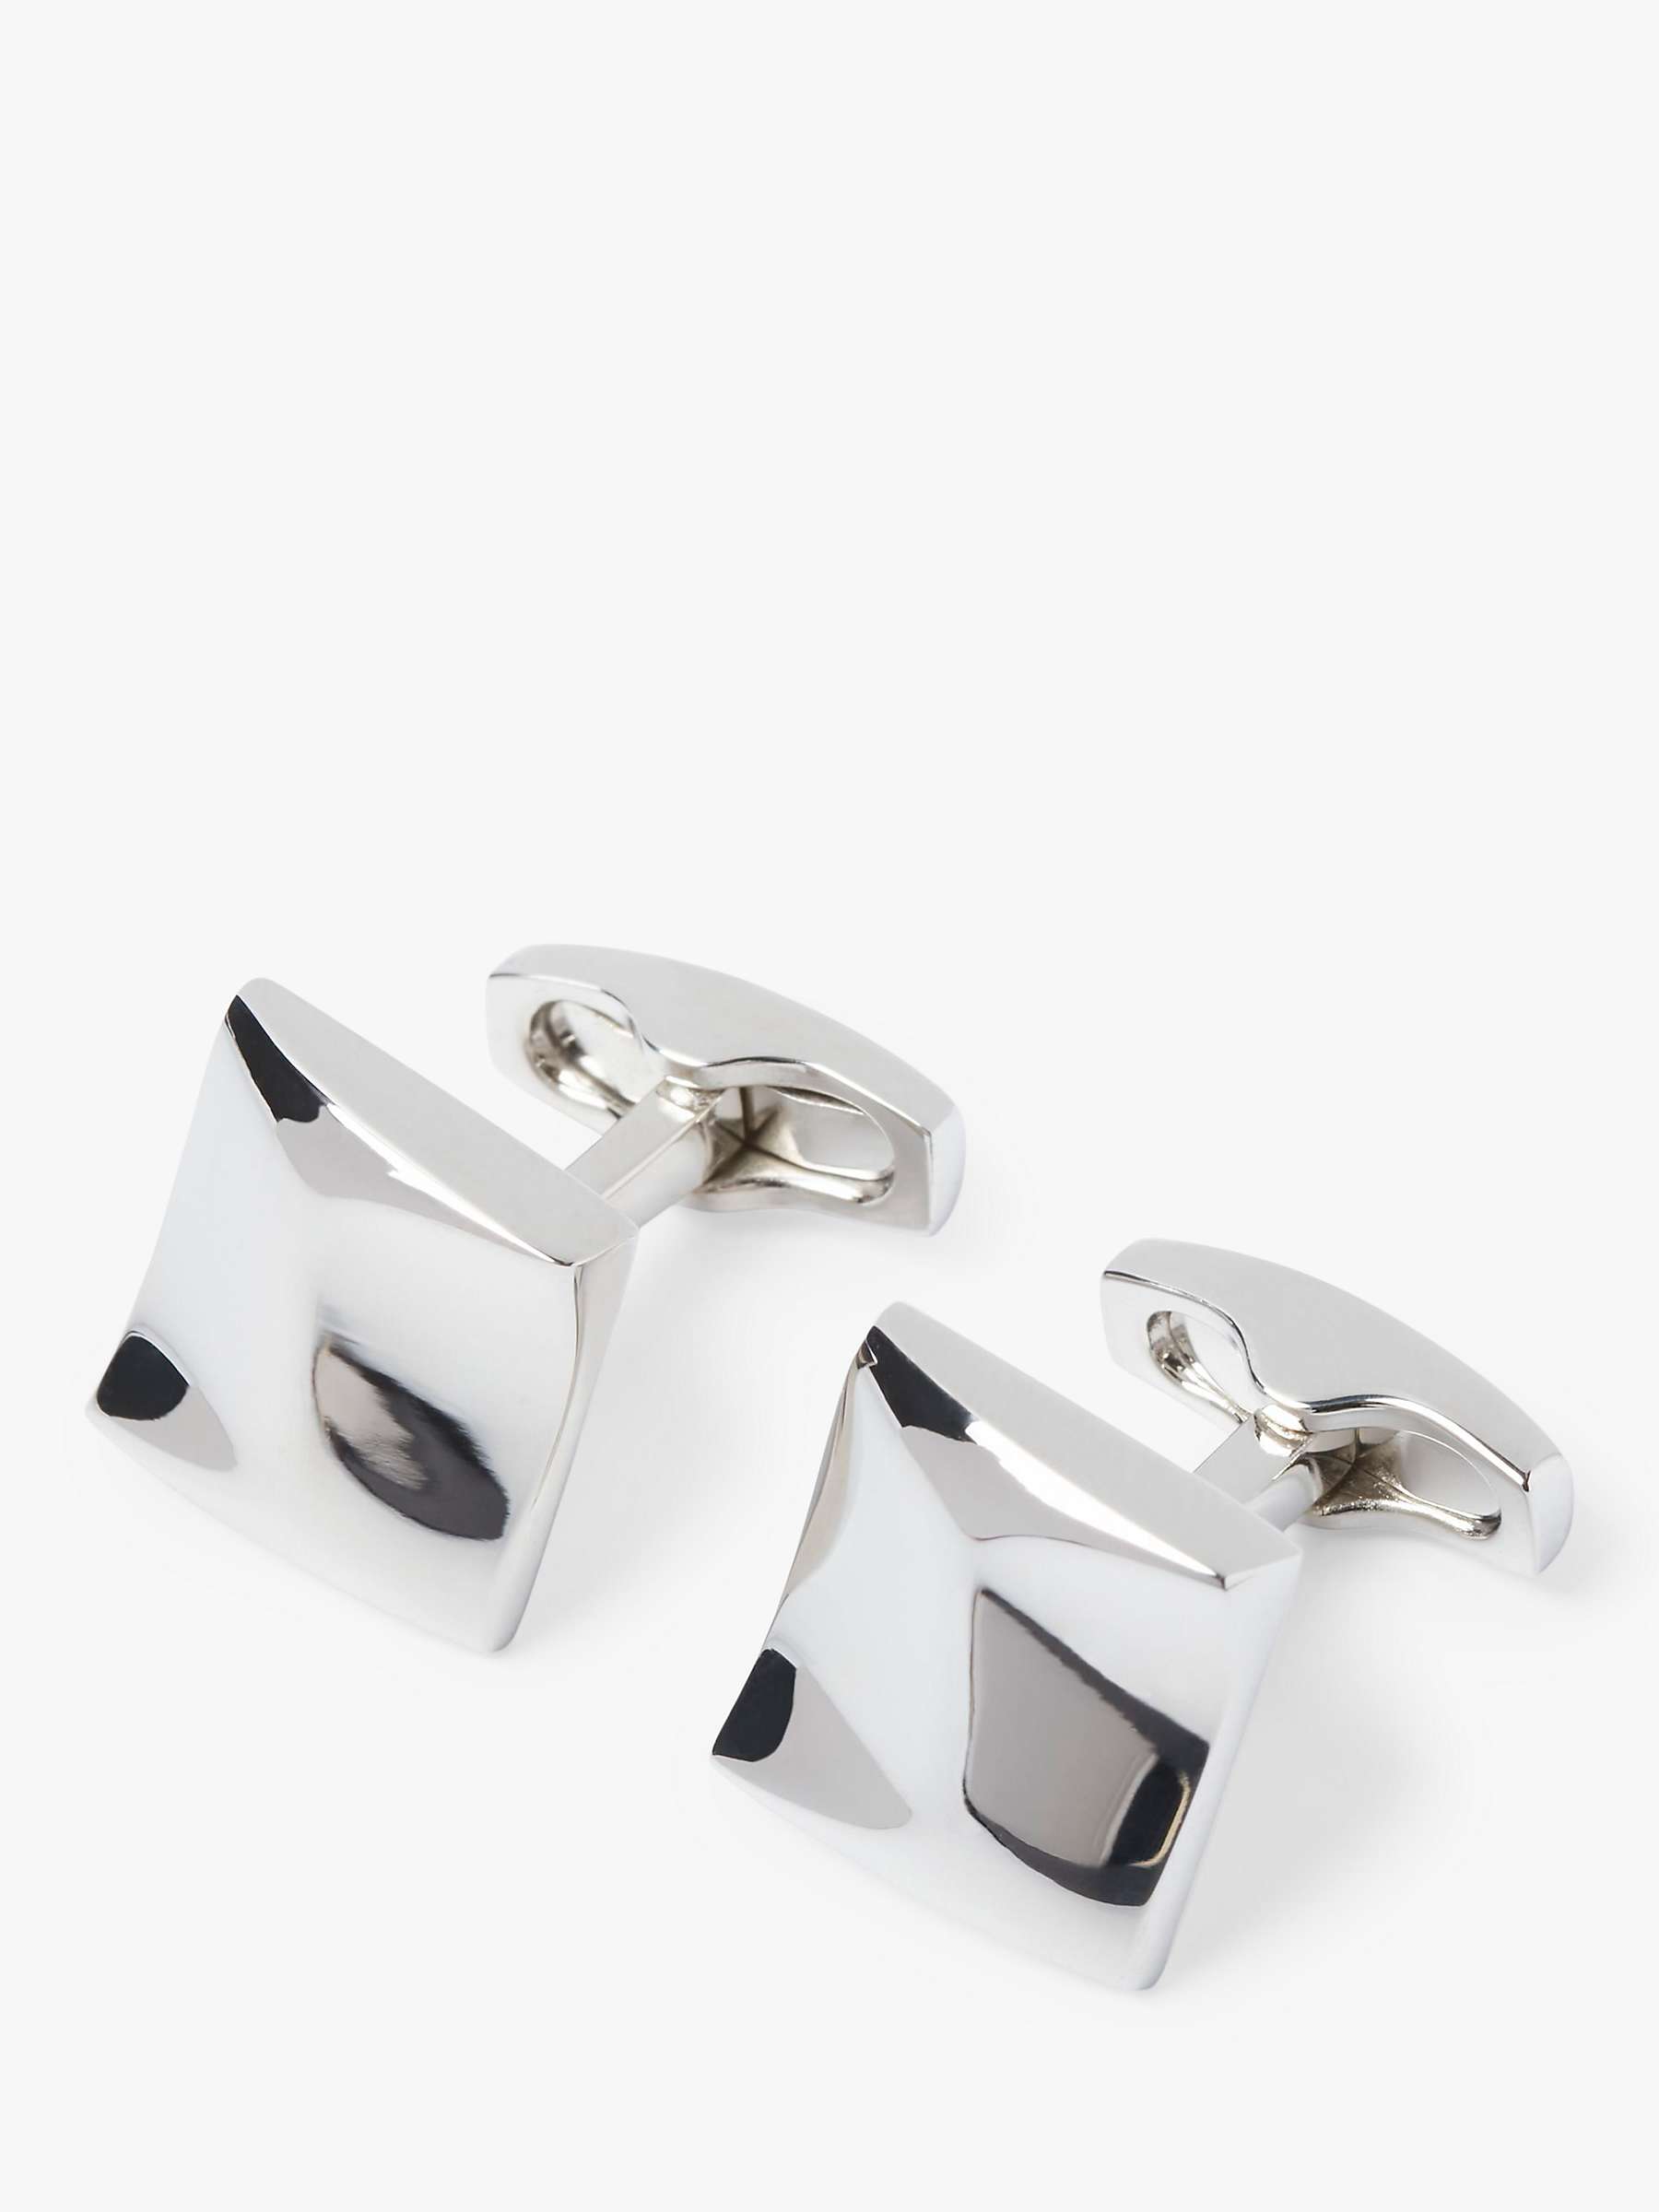 Buy Simon Carter Squiggle Square Cufflinks, Silver Online at johnlewis.com